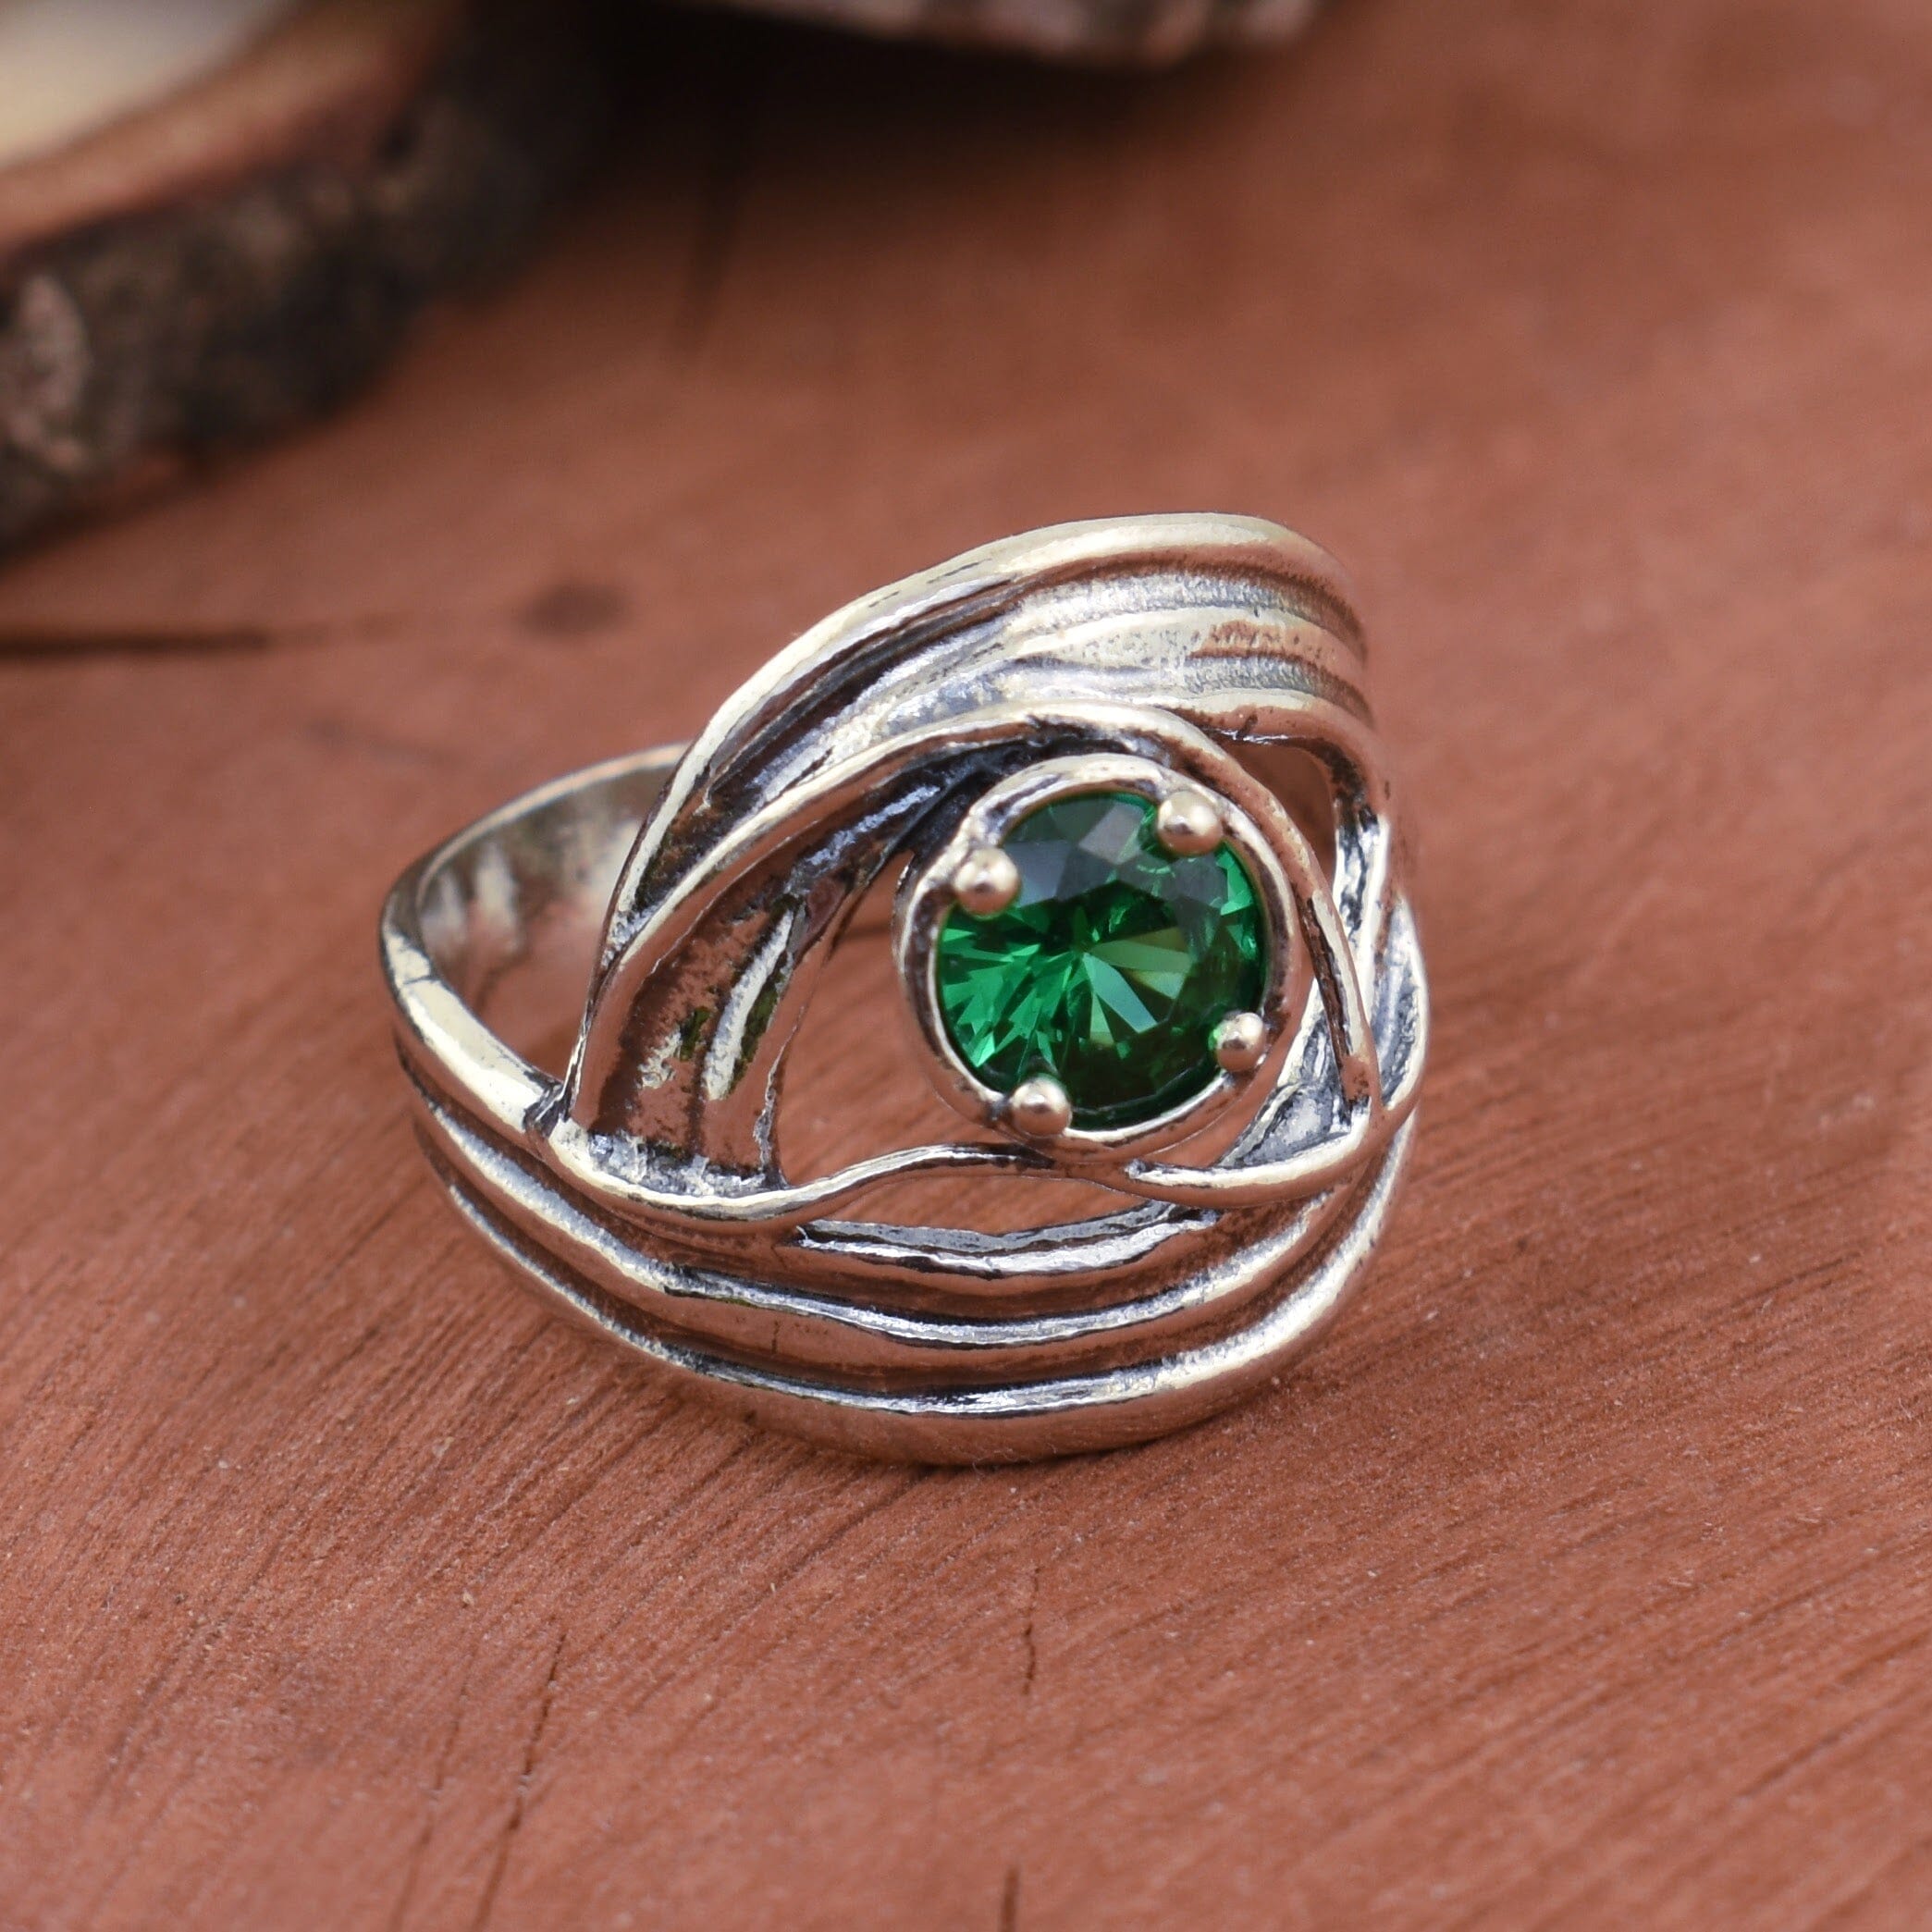 Green stone ring set in sterling silver